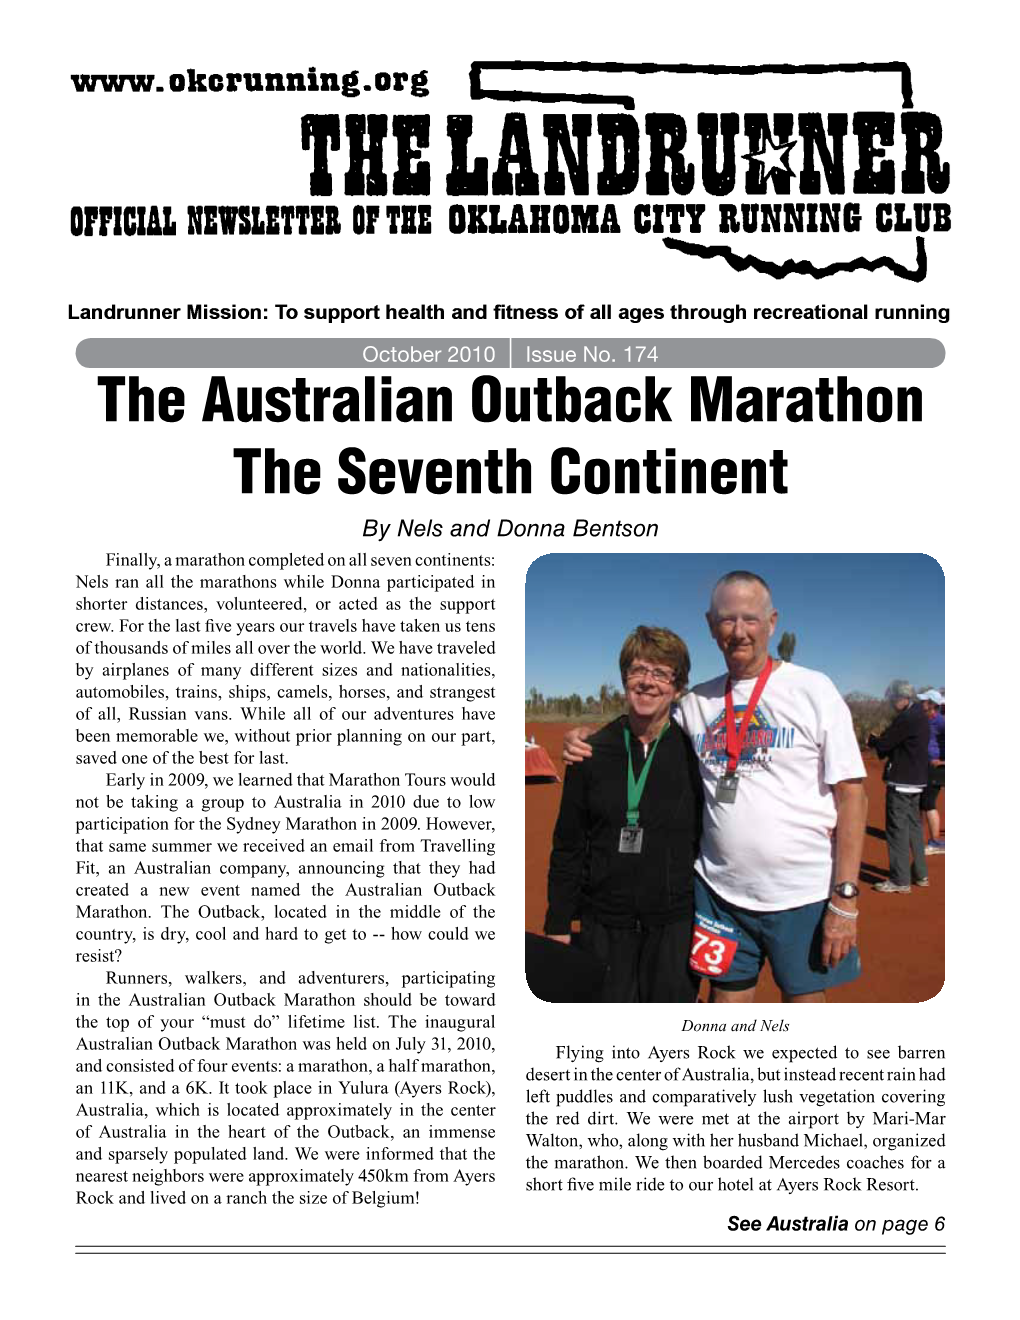 The Australian Outback Marathon the Seventh Continent